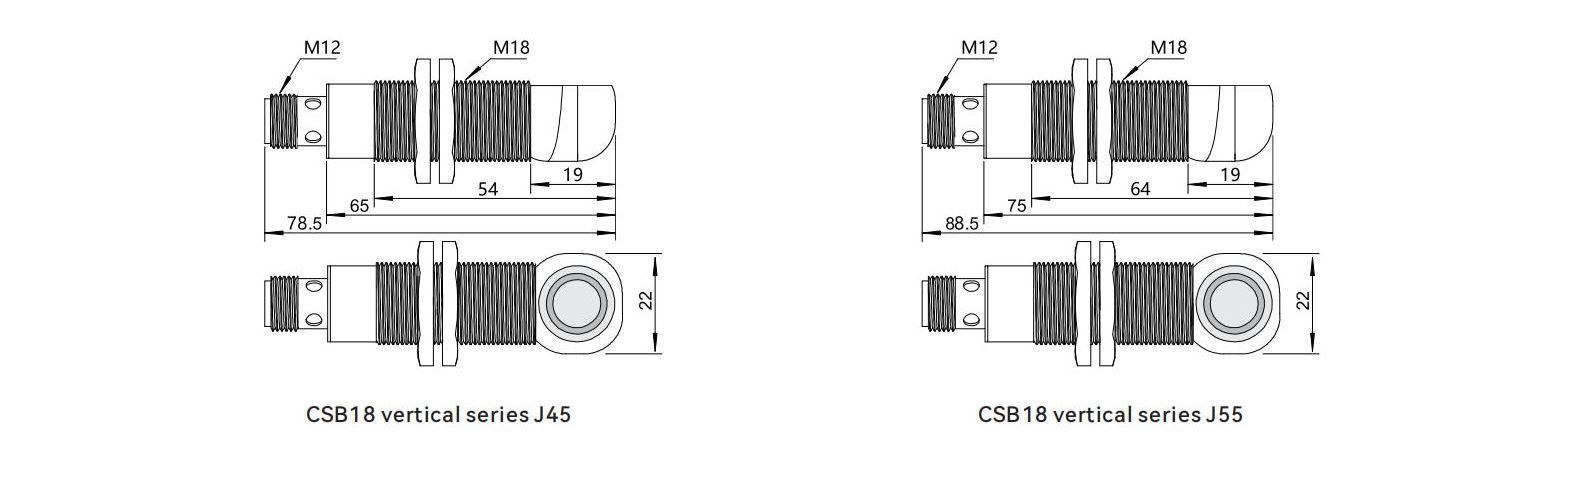 Ultrasonic Switches CSB18 series Dimensions